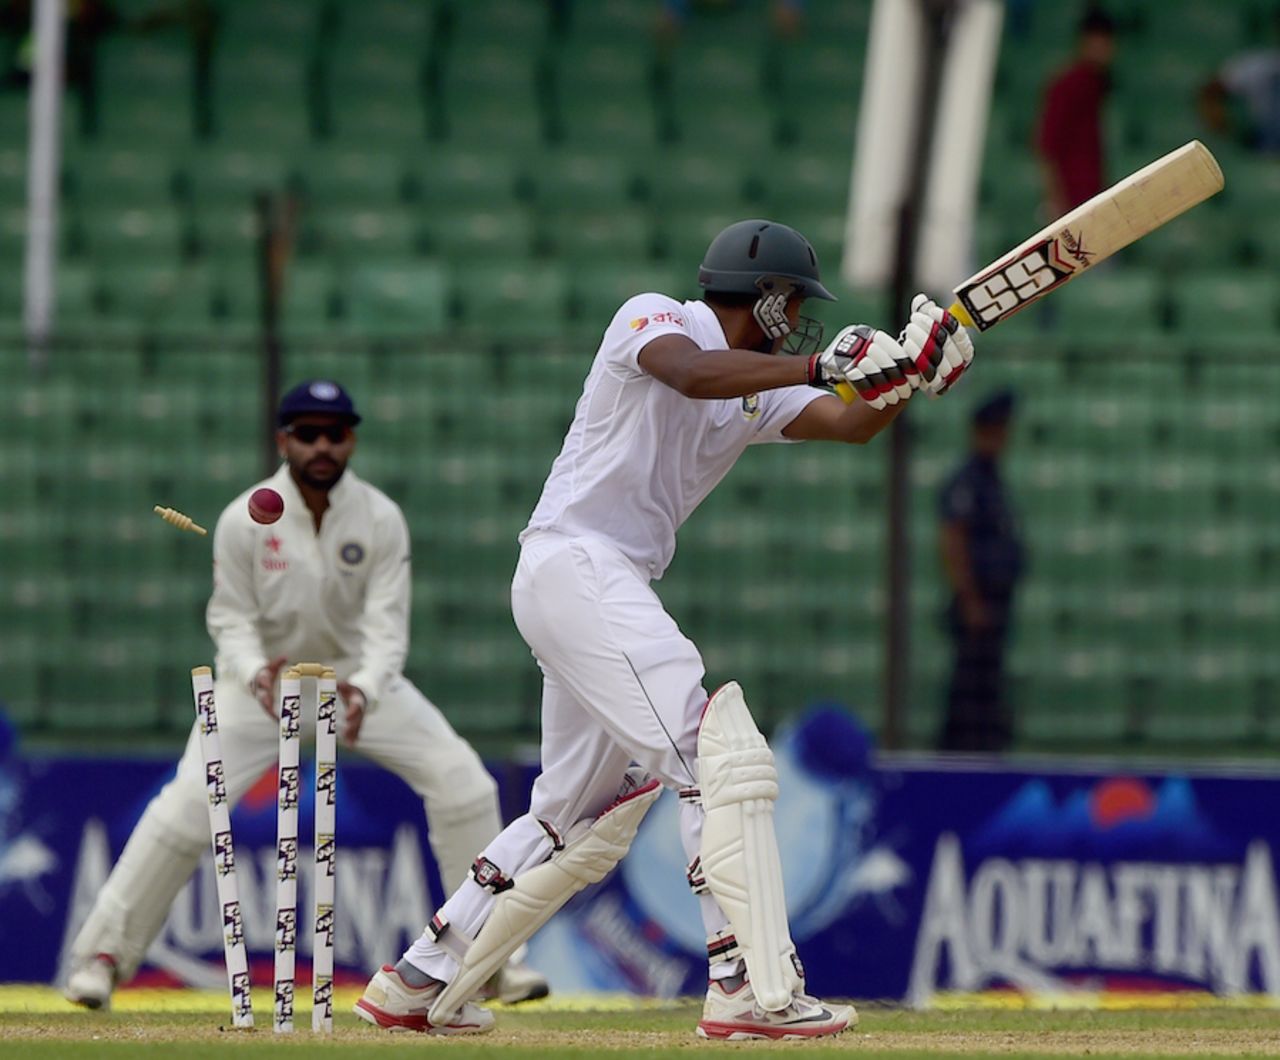 Soumya Sarkar chopped on after a strokeful 37, Bangladesh v India, only Test, 4th day, Fatullah, June 13, 2015